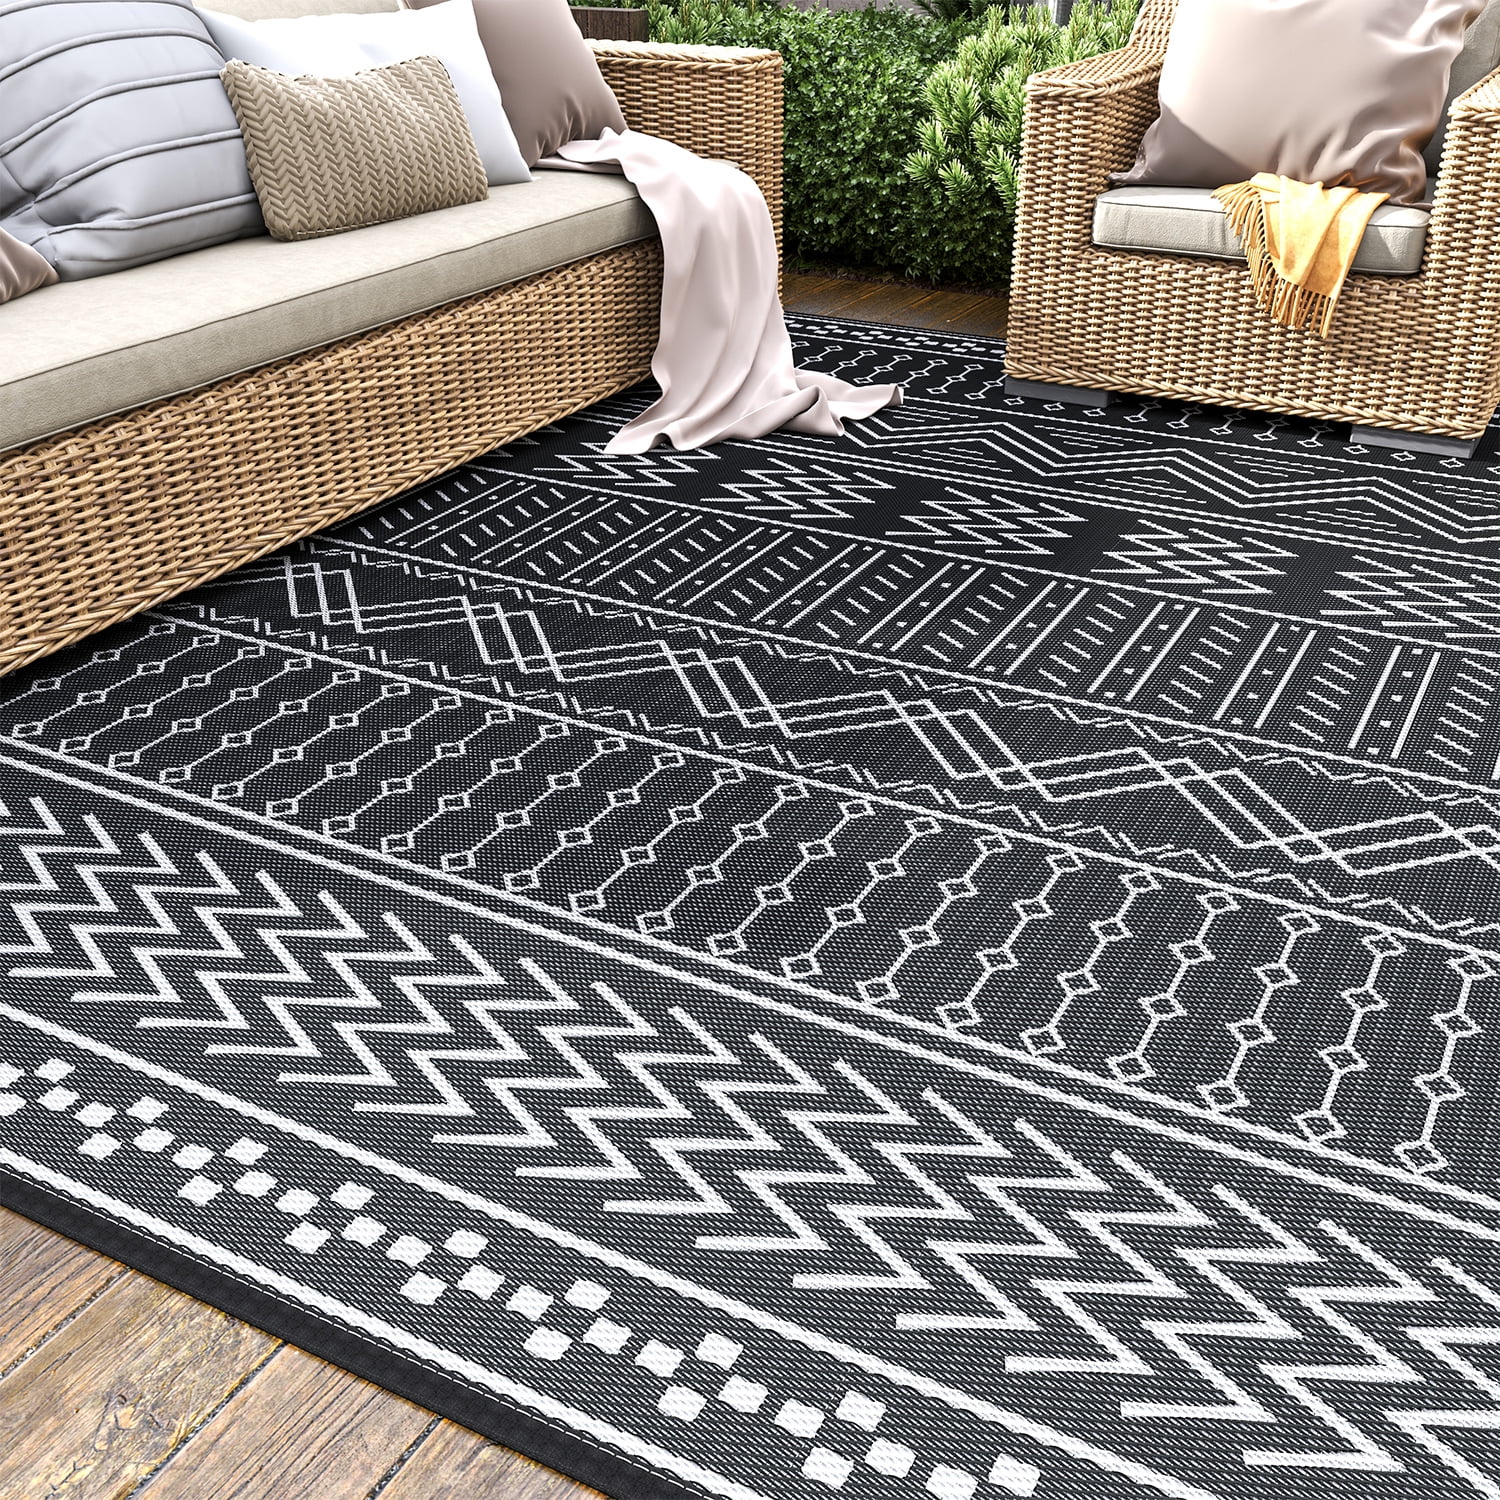 Sixhome Outdoor Rug Carpet 5x8 Waterproof Patio Rug Reversible Floral Outdoor Plastic Straw Rugs for Patio Decor Indoor Outdoor Area Rug Black and